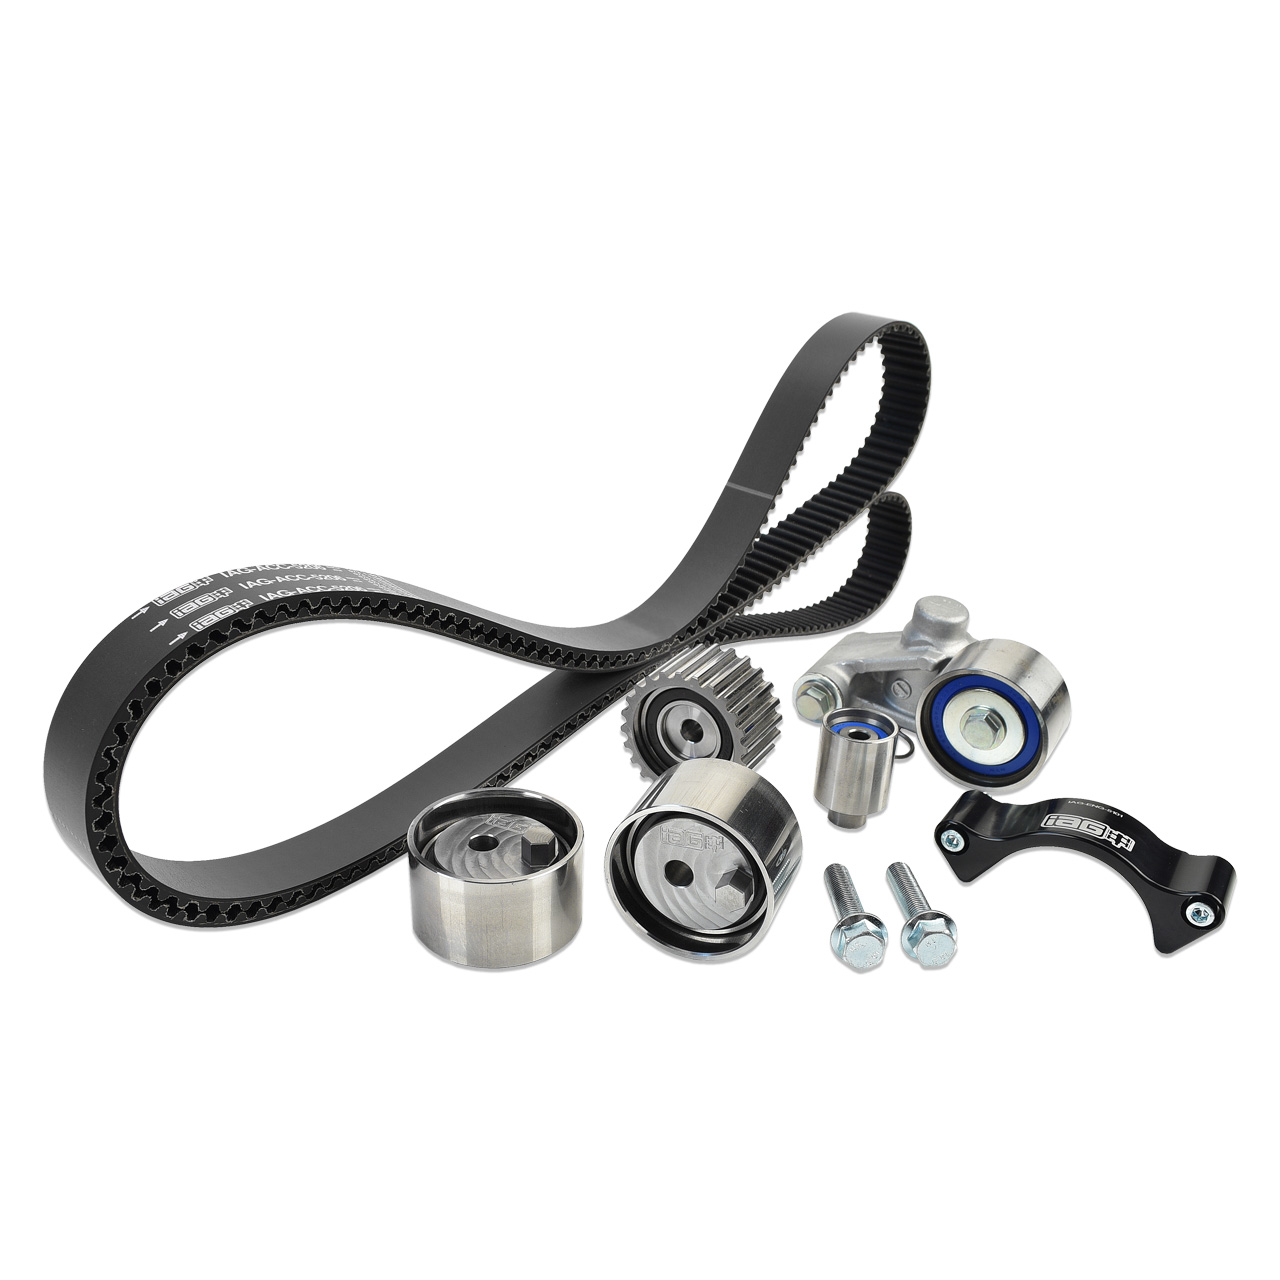 IAG Timing Belt Kit with IAG Black Racing Belt, Timing Guide